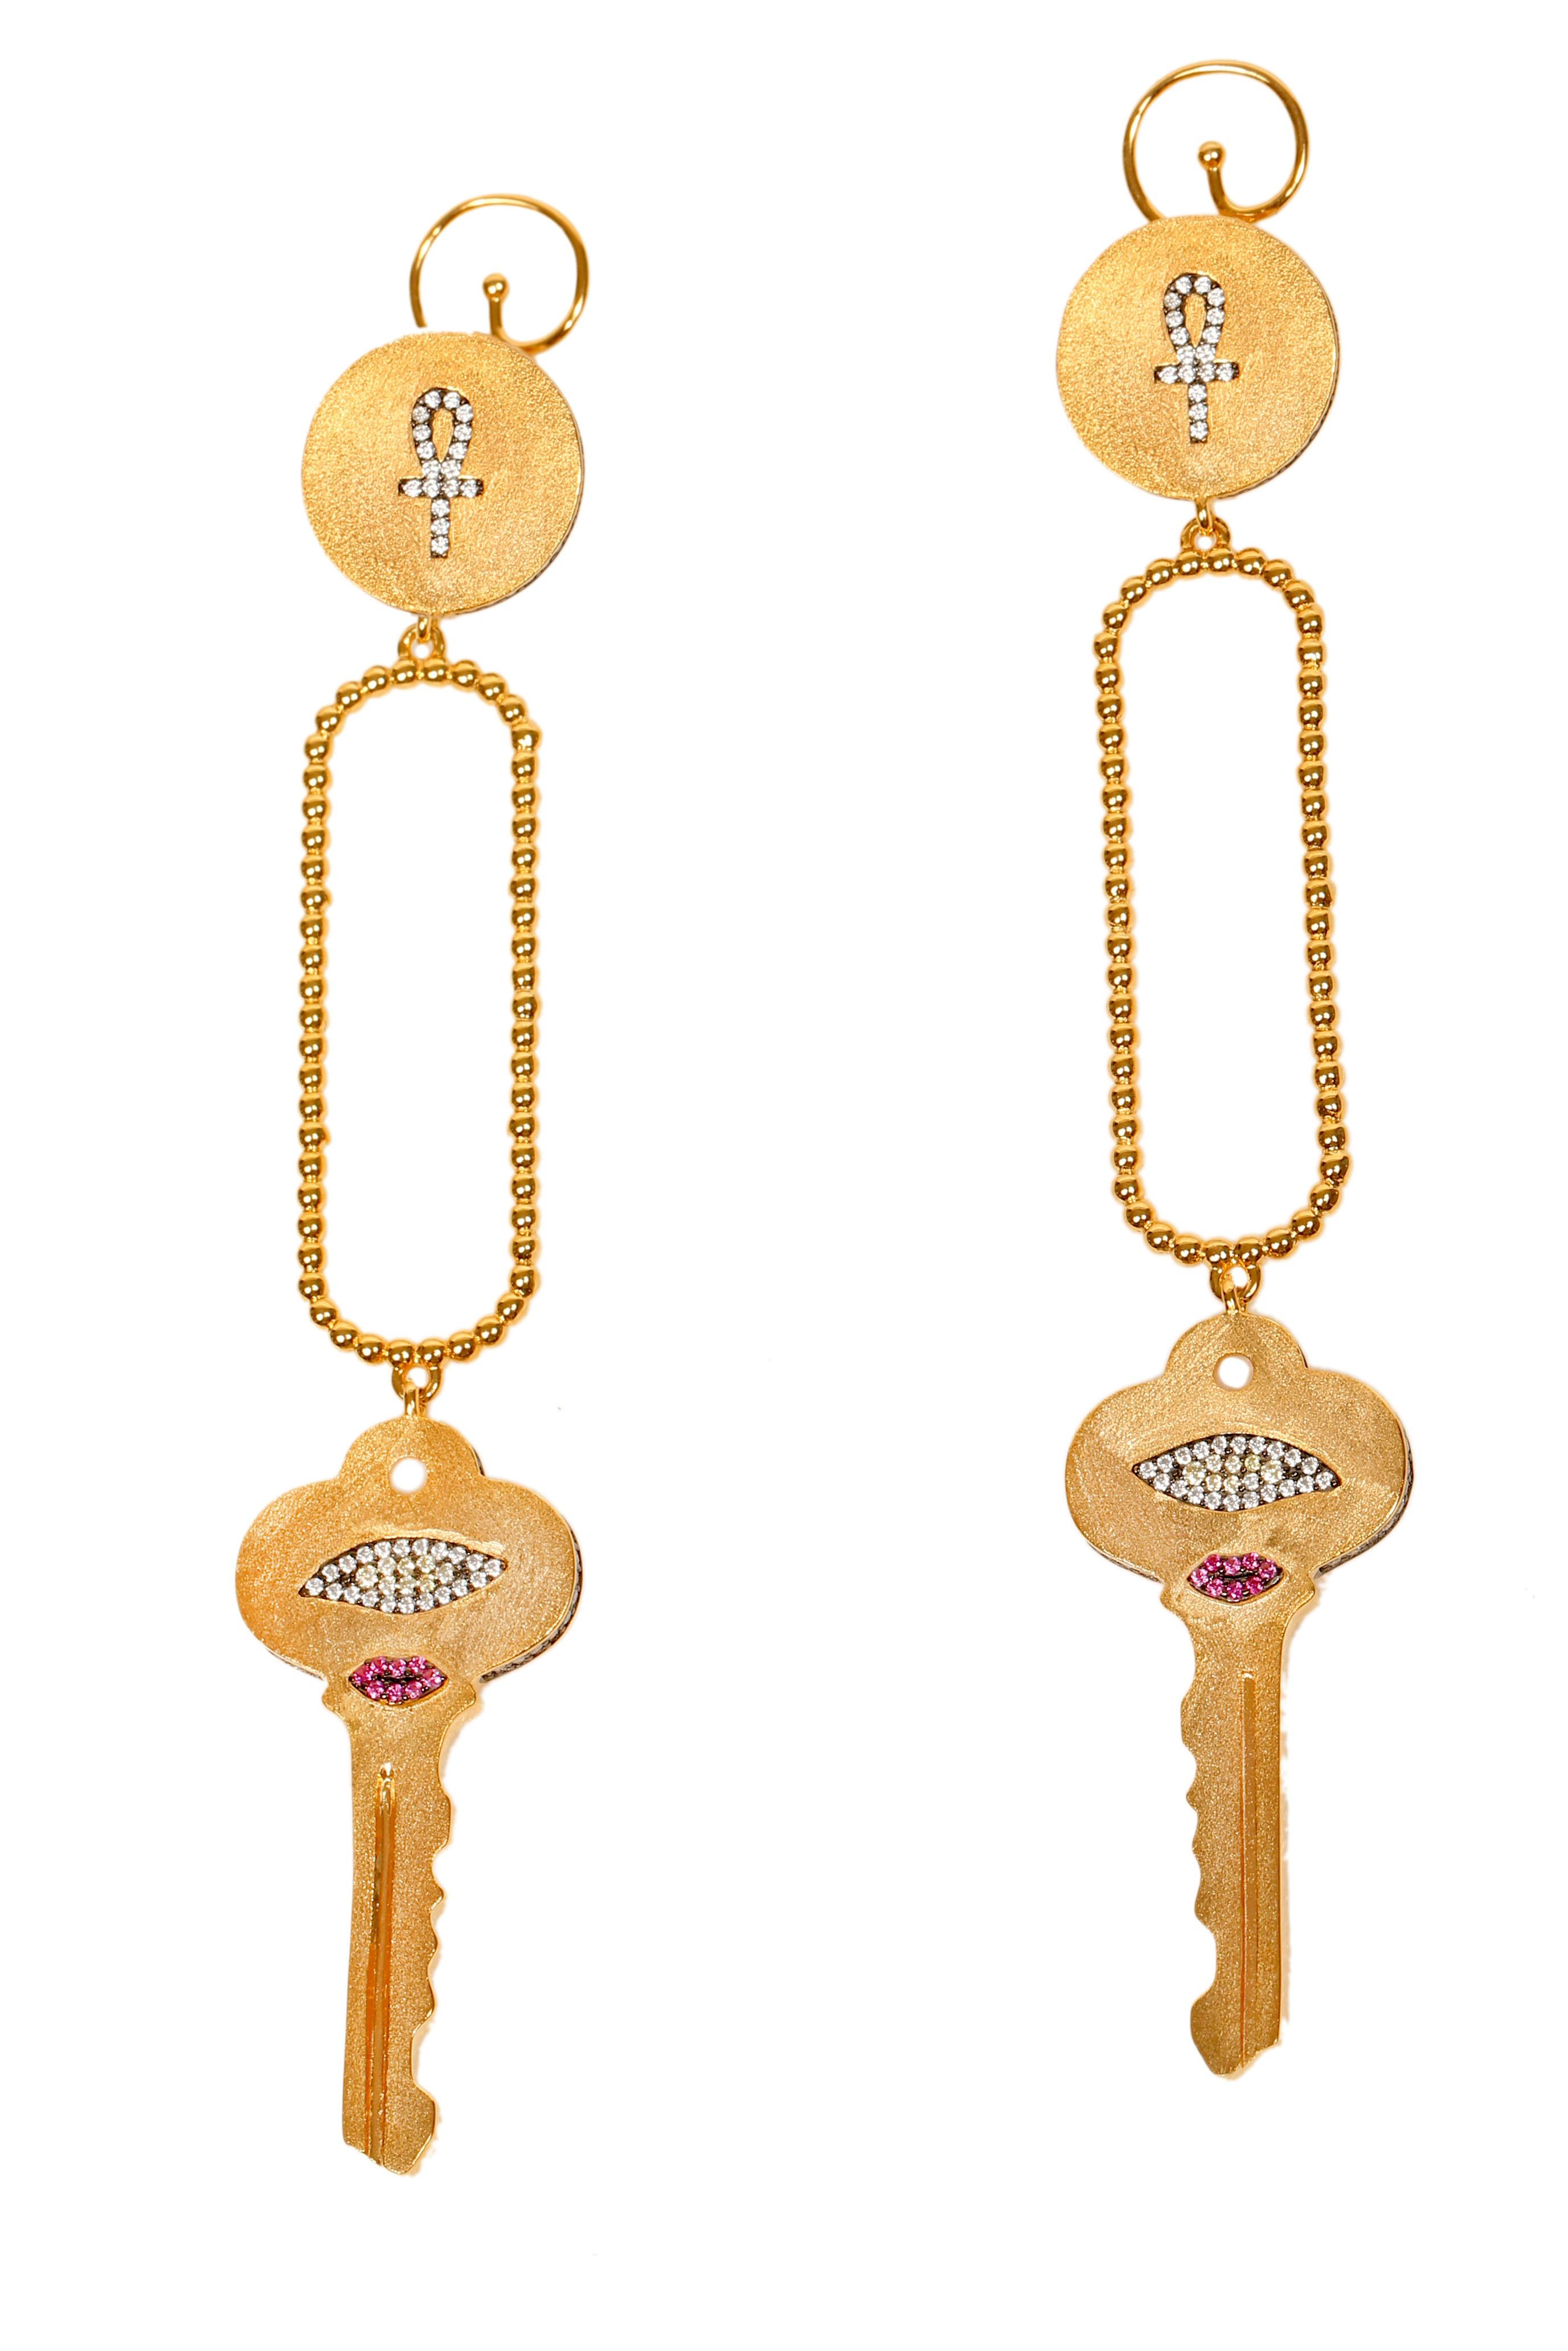 Ammanii Key Earrings with Ankh Amulet in Vermeil Gold For Sale